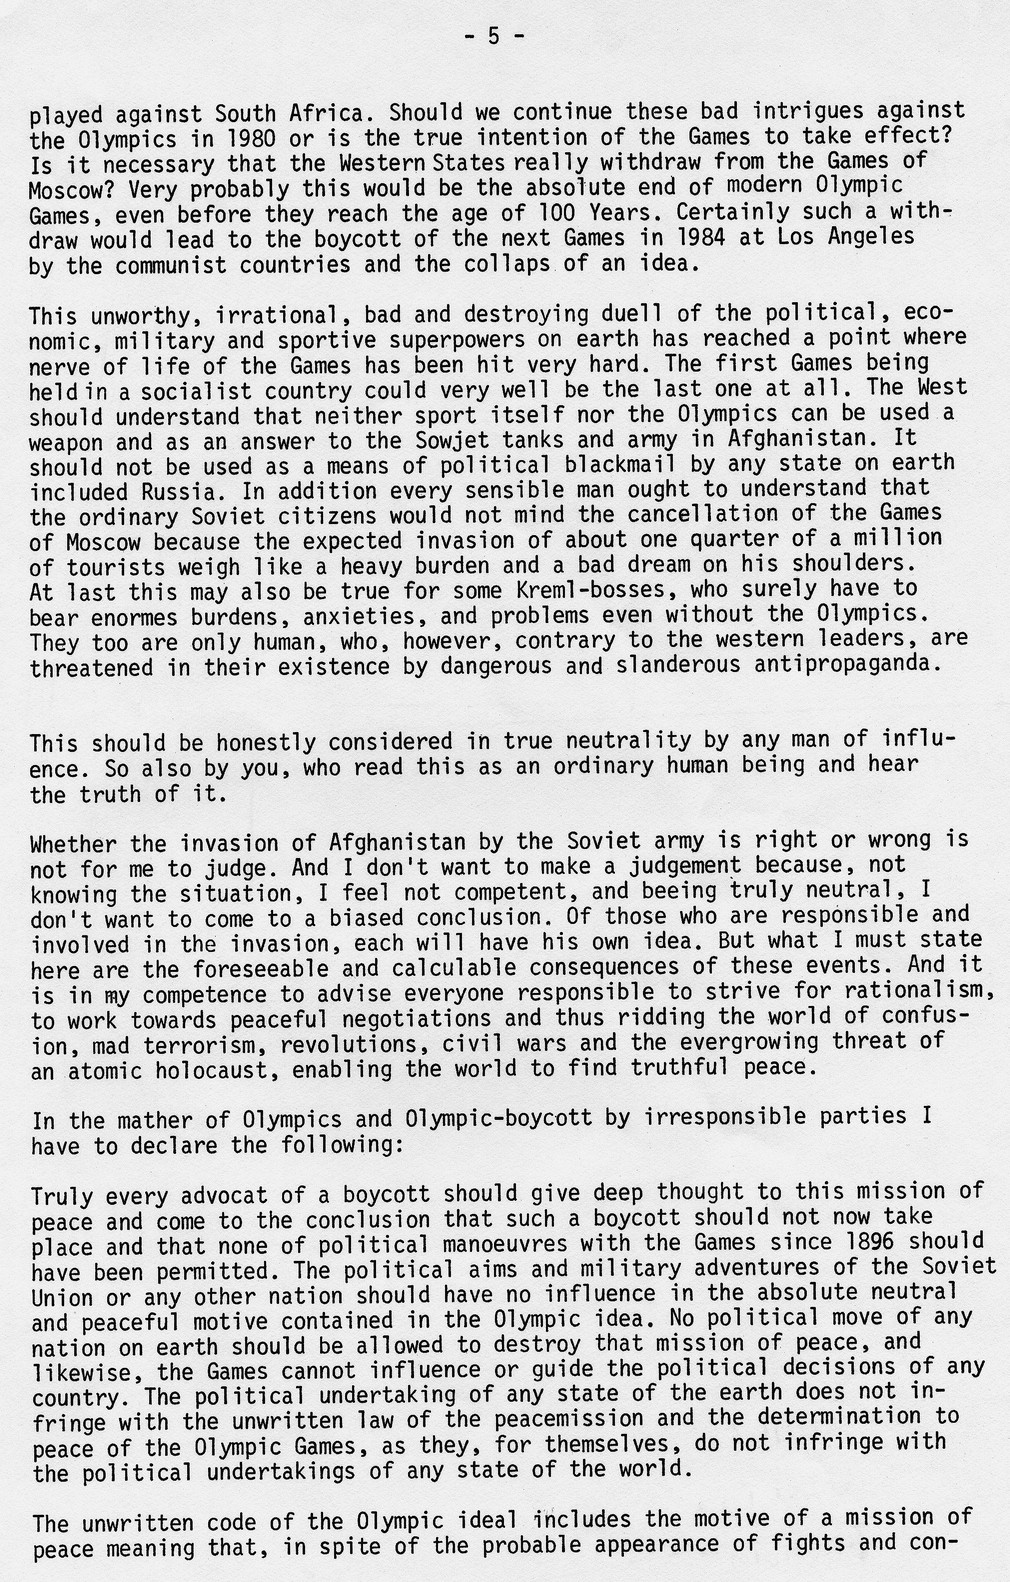 Original Letter – Page 5 of 6